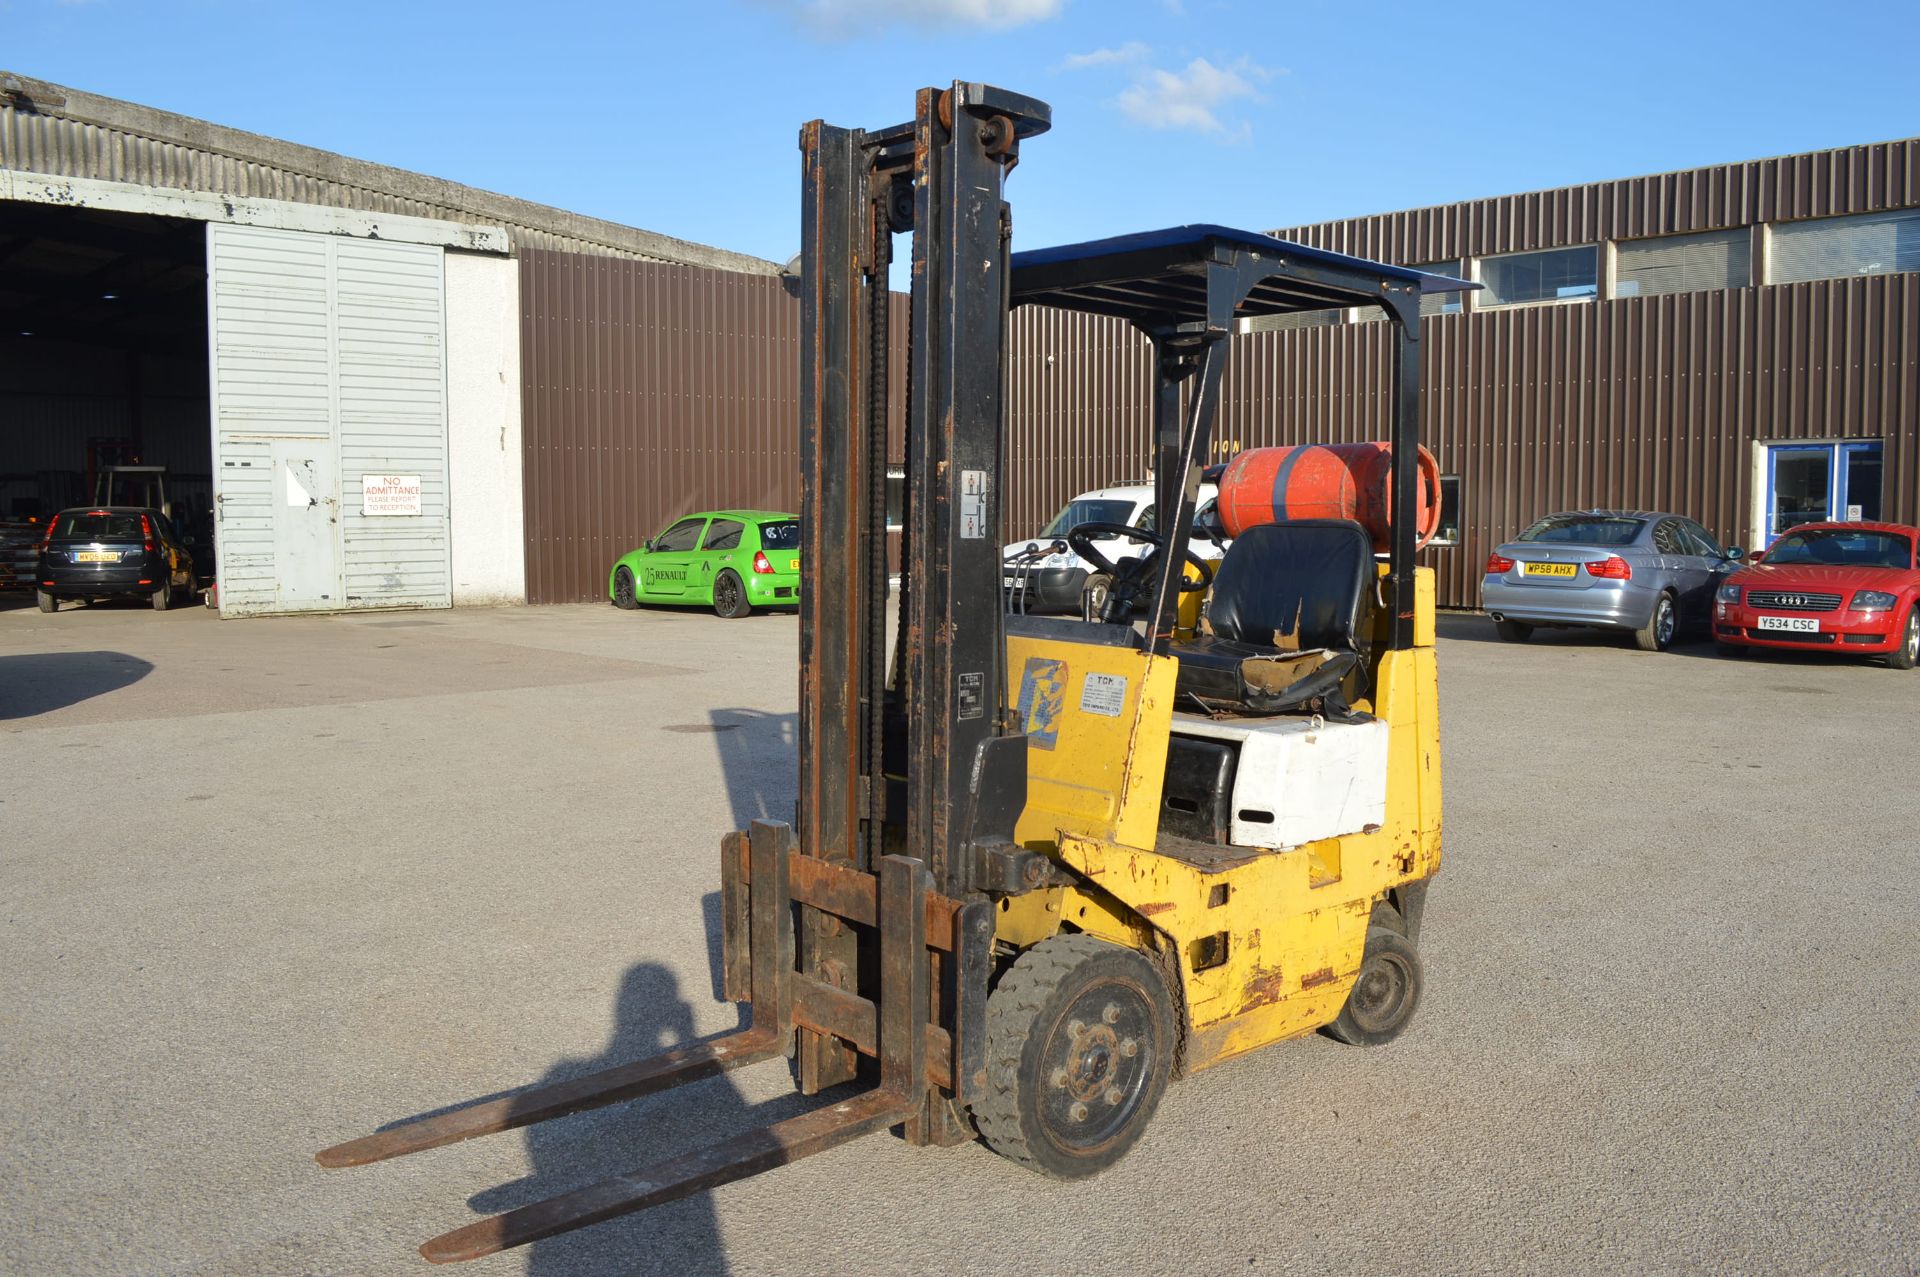 TCM 1.75T LPG FORKLIFT - GAS BOTTLE NOT INCLUDED   BRAKES GOOD RATED CAPACITY: 1600KG MAX FORK - Image 3 of 14